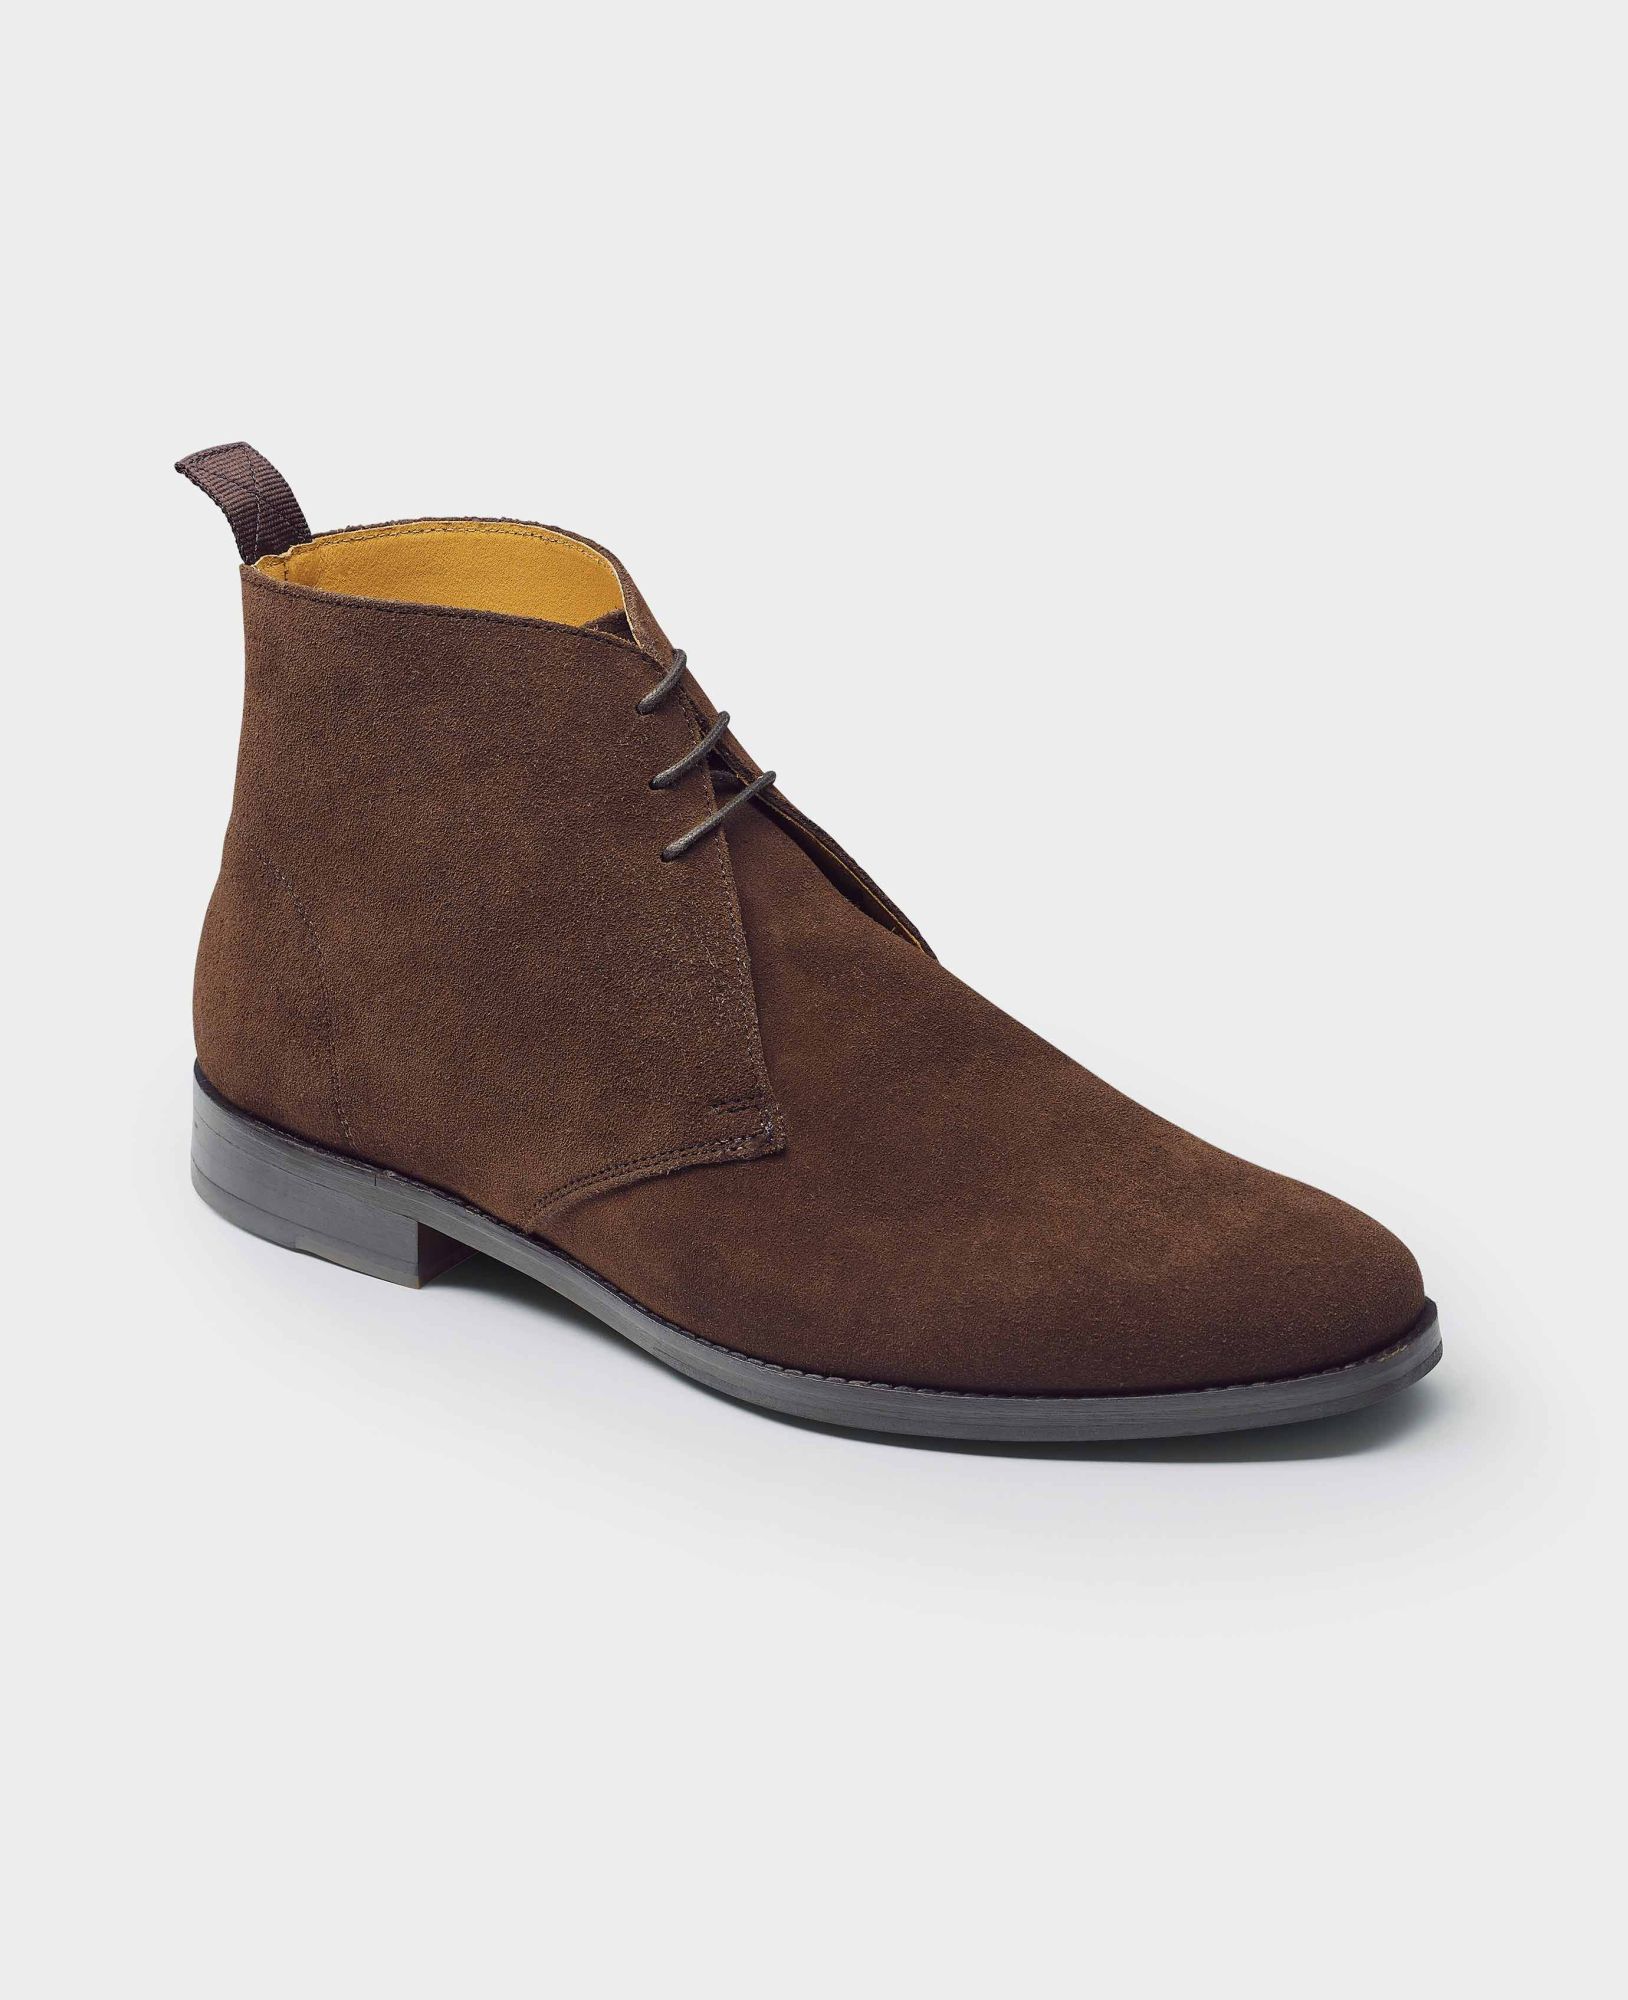 Tan Suede Chelsea Boots 7